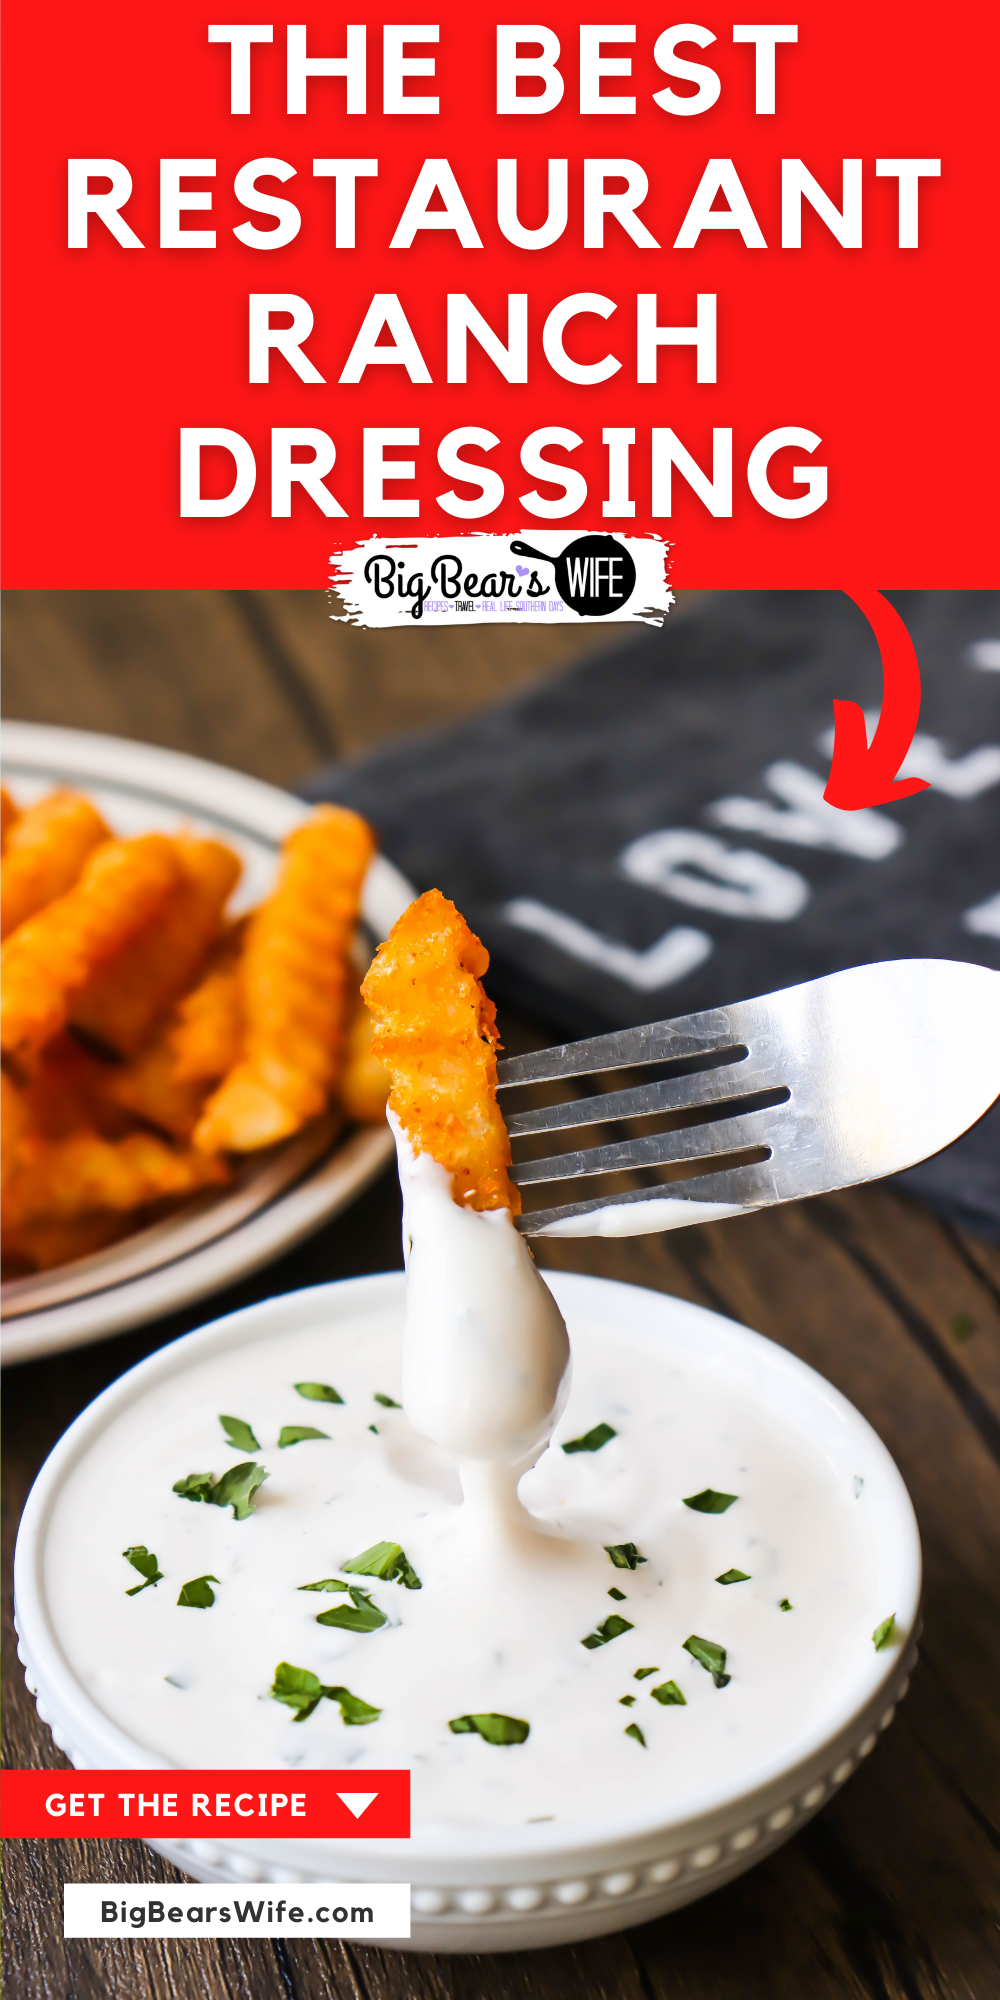 This Copycat Rockola Ranch Dressing Recipe is pretty much 100% like the restaurant ranch dressing that was served at Rockola Cafe! It's by far the BEST ranch ever!  via @bigbearswife